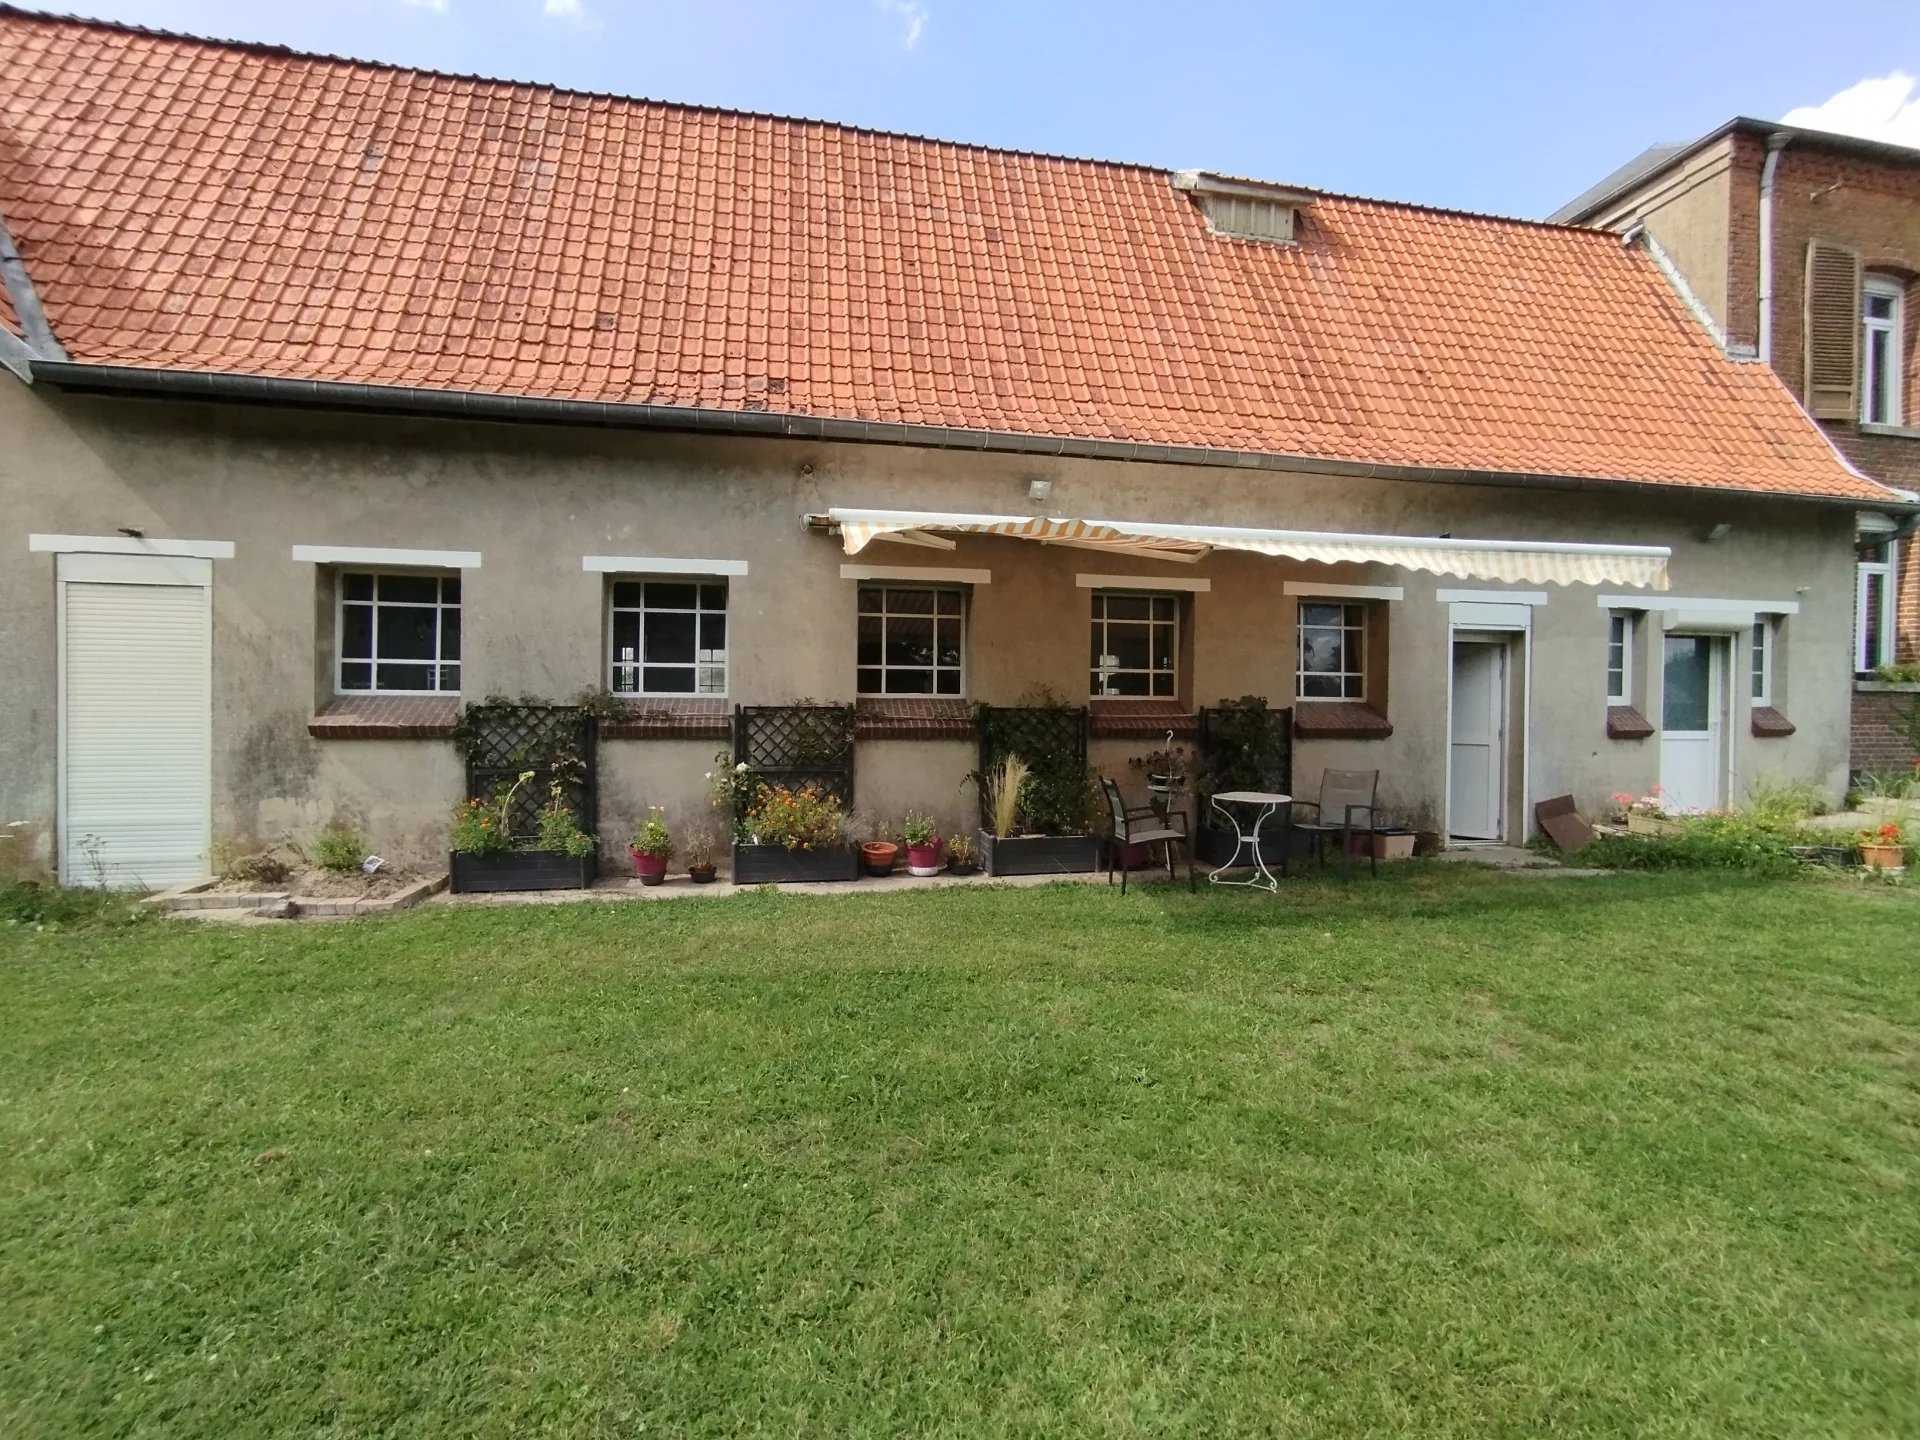 Residential in Avesnes-sur-Helpe, Nord 12107750